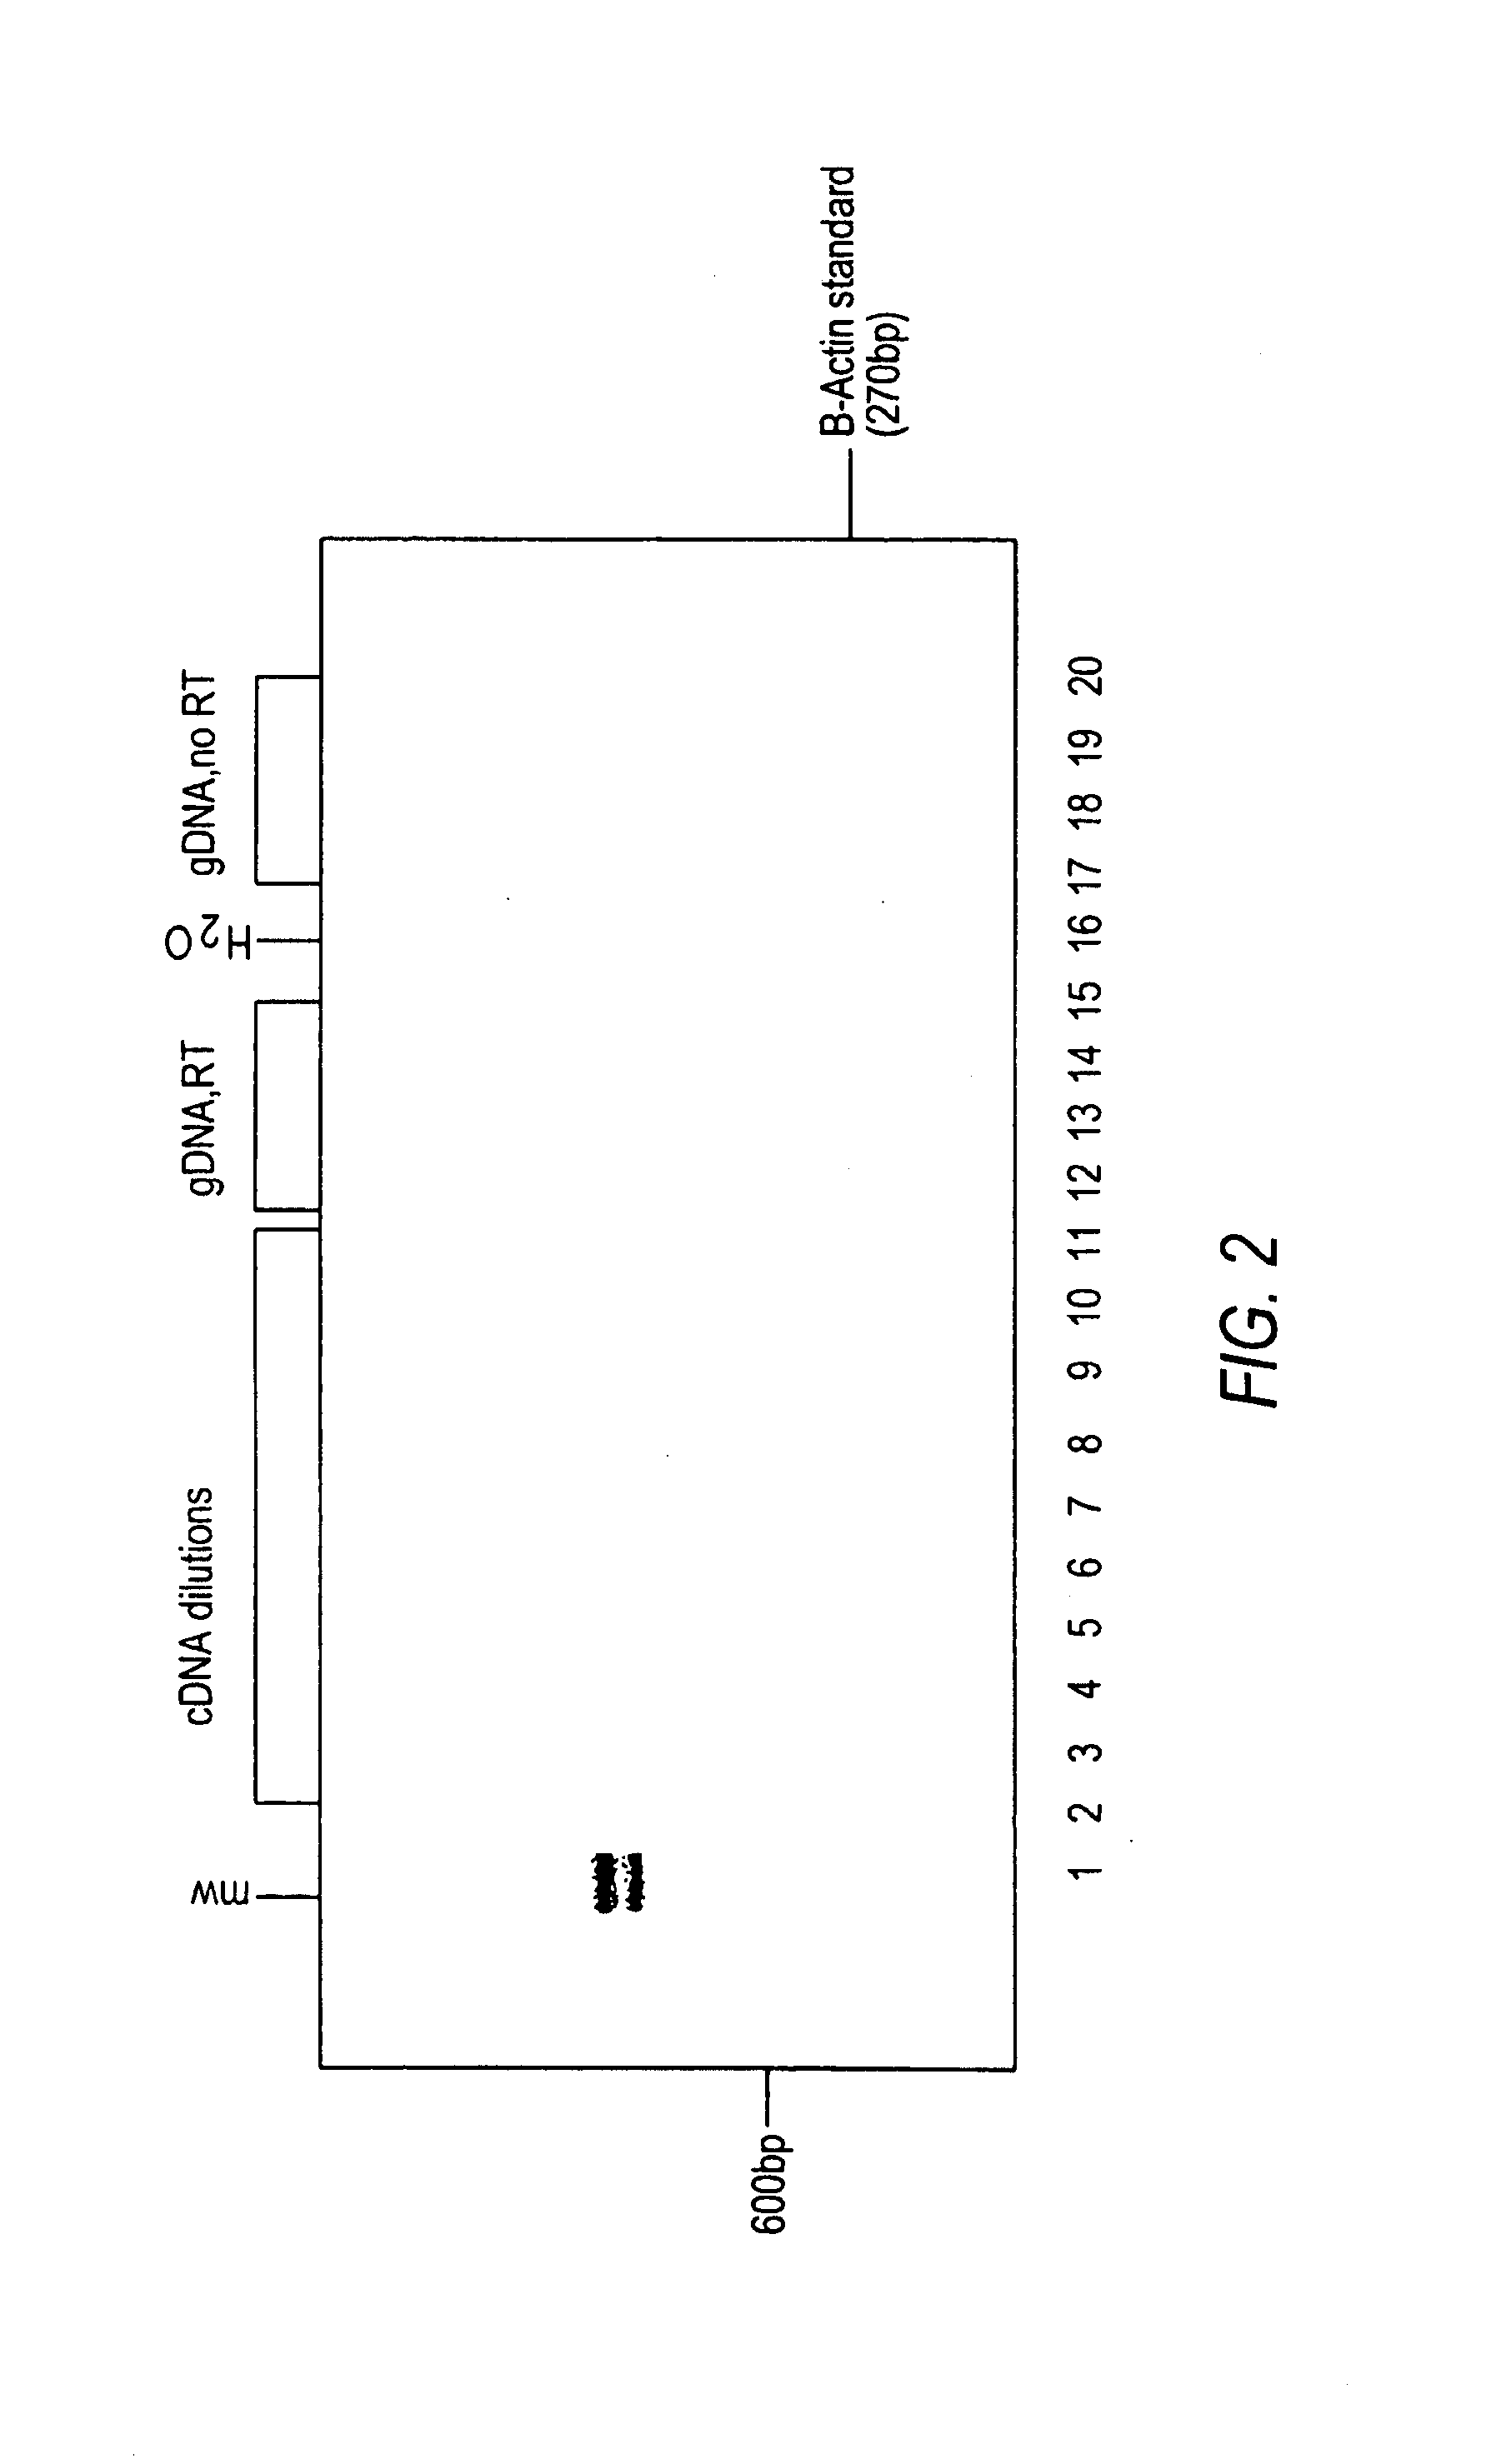 Universal RT-coupled PCR method for the specific amplification of mRNA